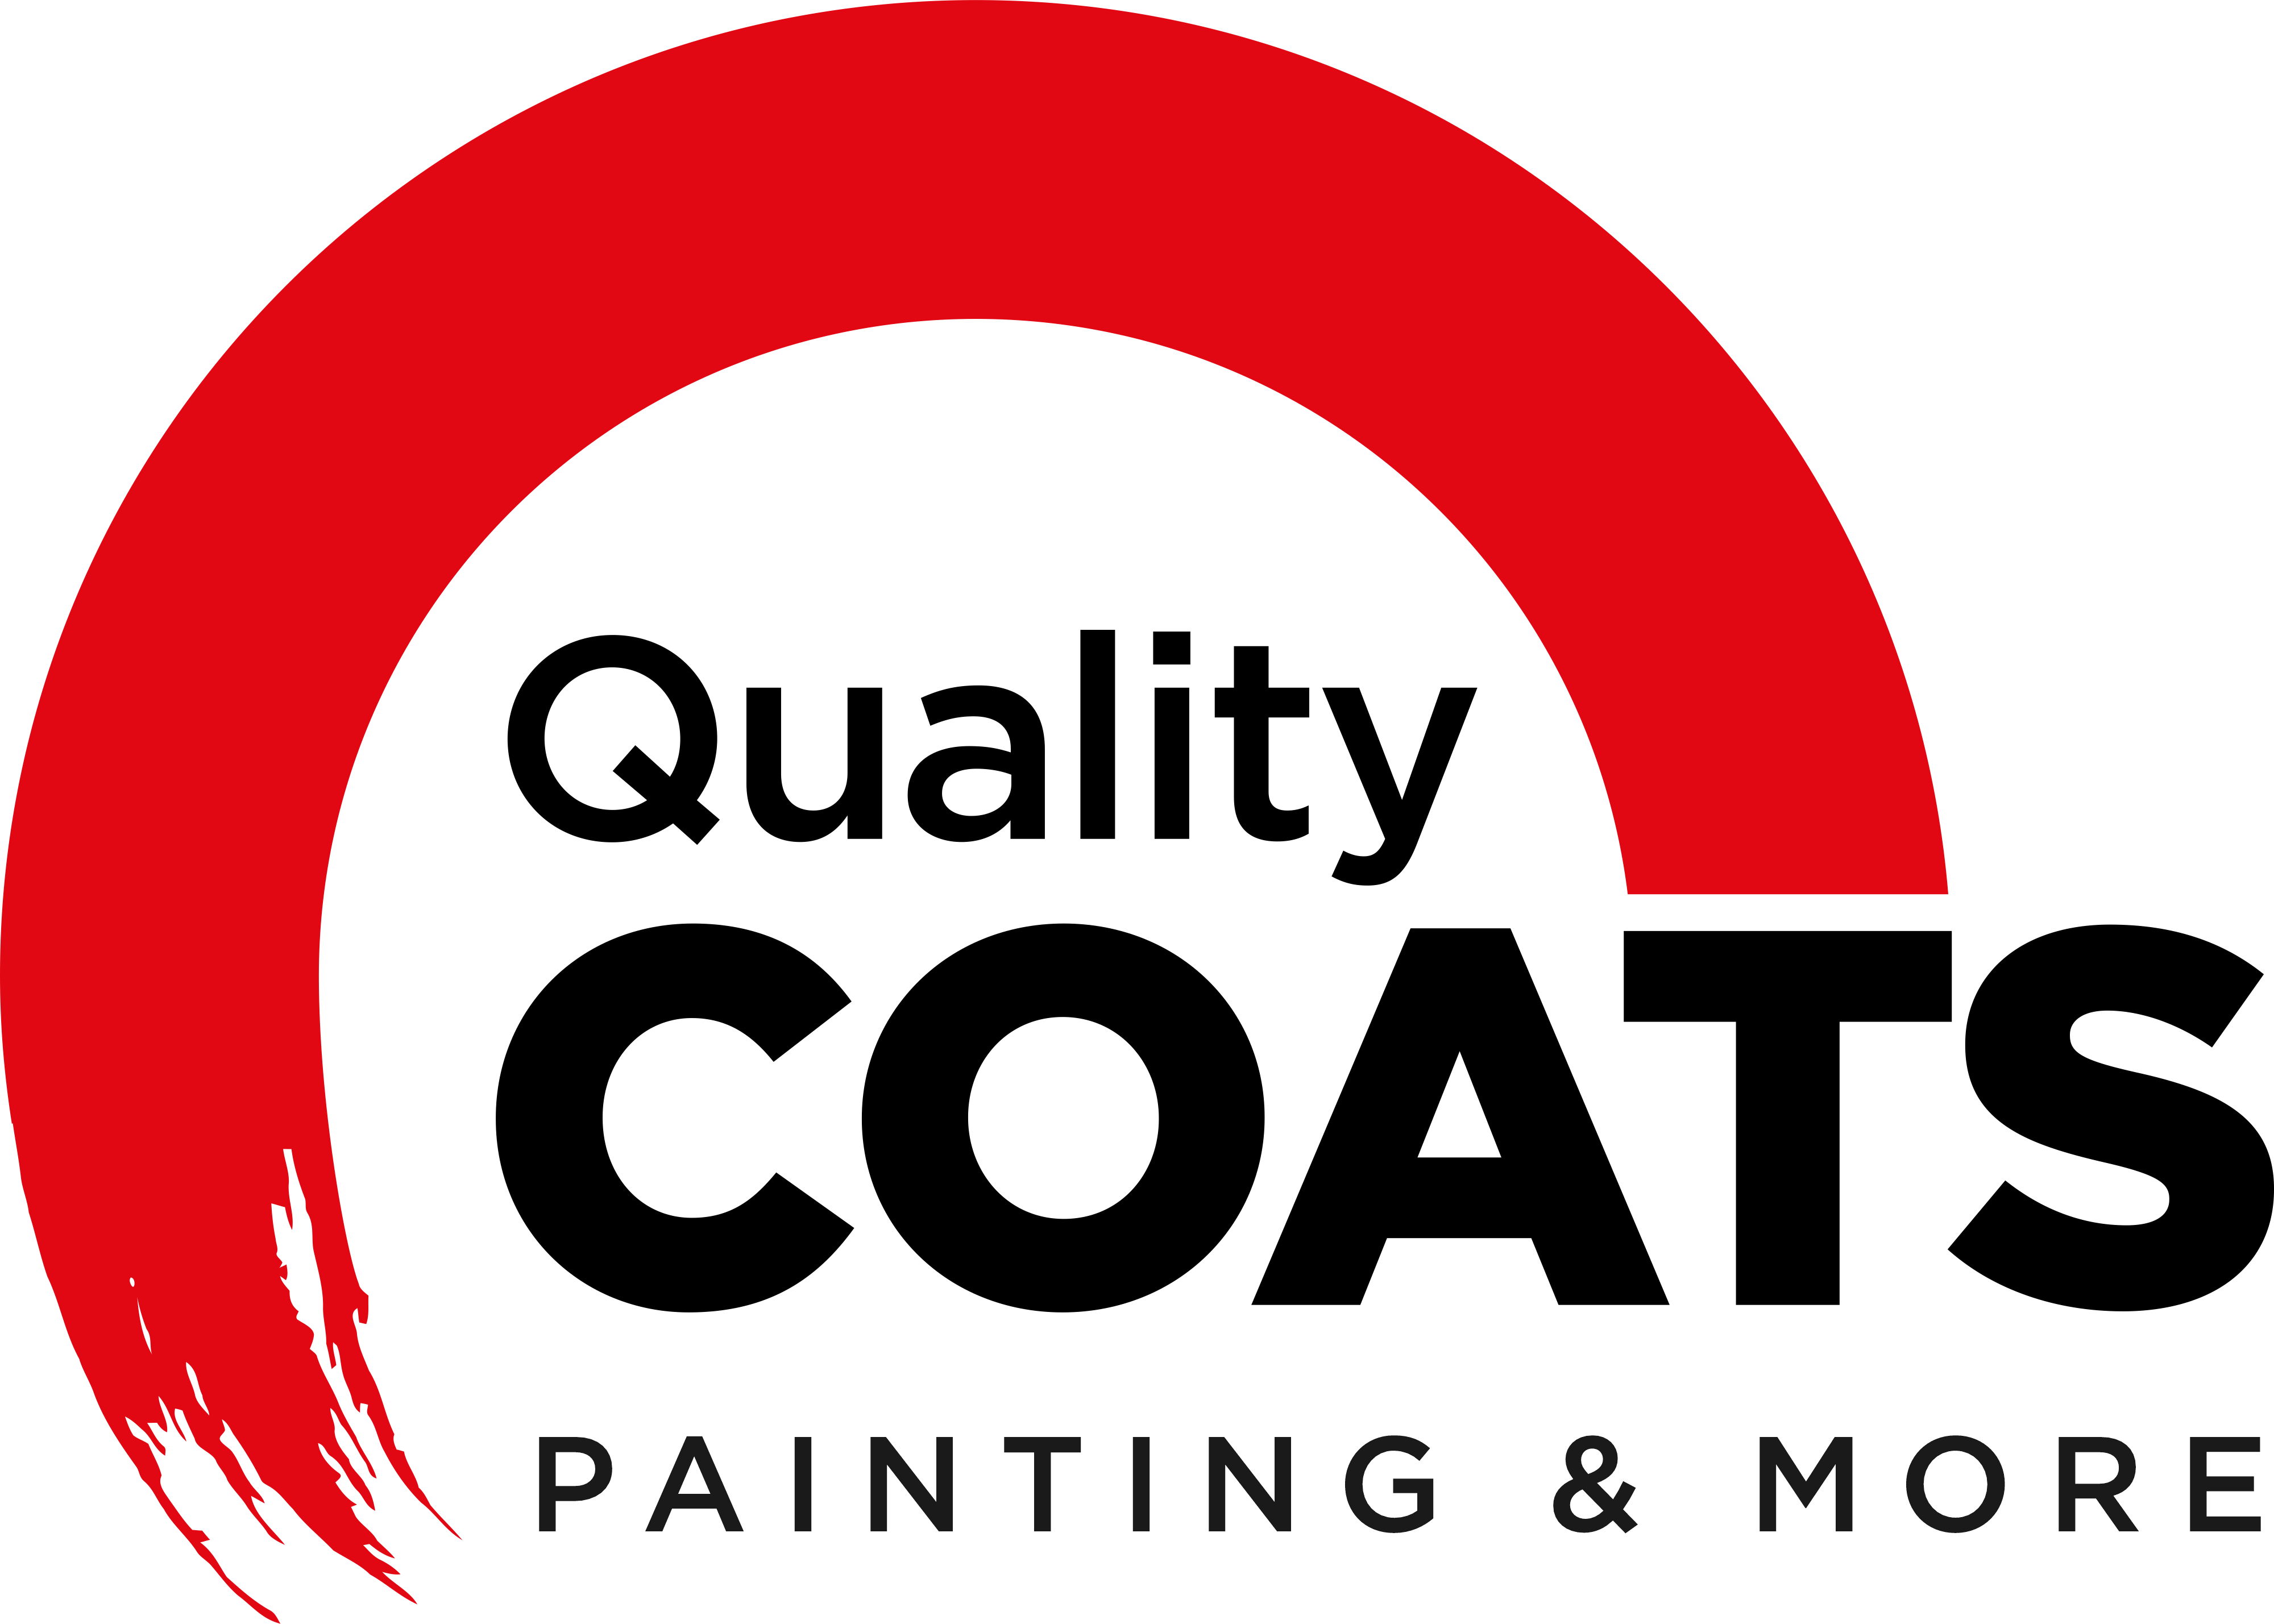 Quality Coats – Residential Painting Company Melbourne FL